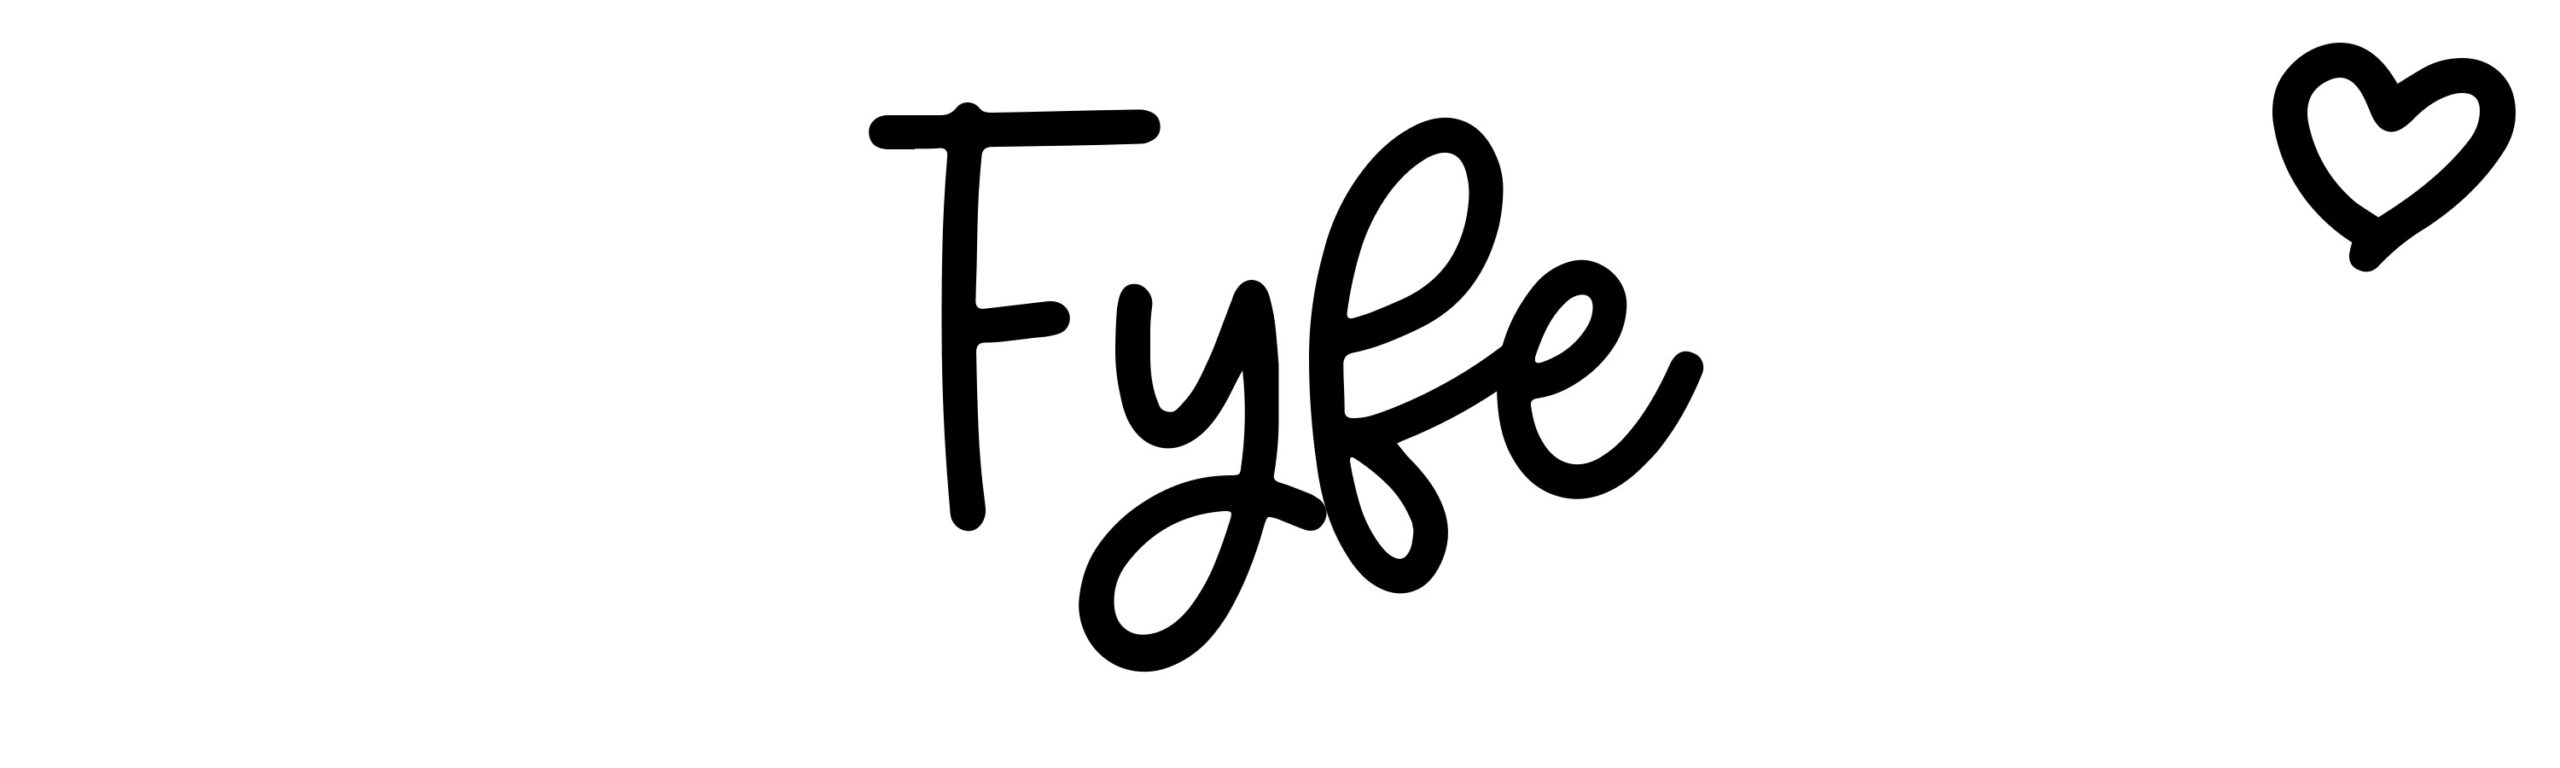 Fyfe - Name meaning, origin, variations and more